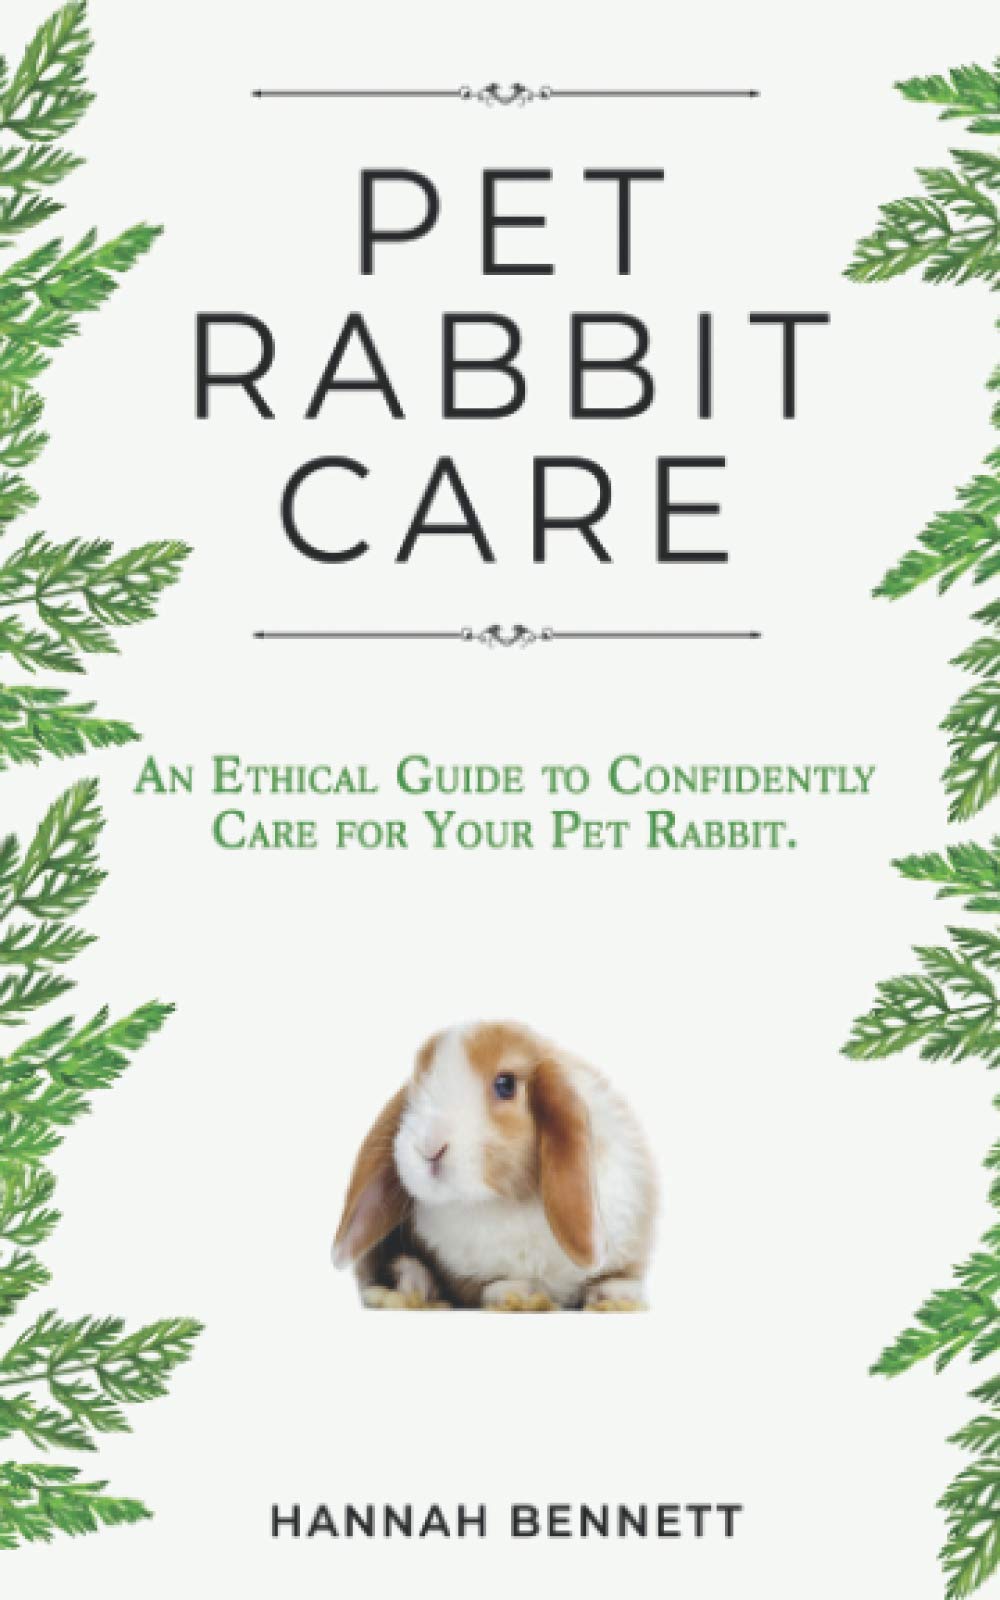 Pet-Rabbit-Care-An-Ethical-Guide-to-Confidently-Care-for.jpg